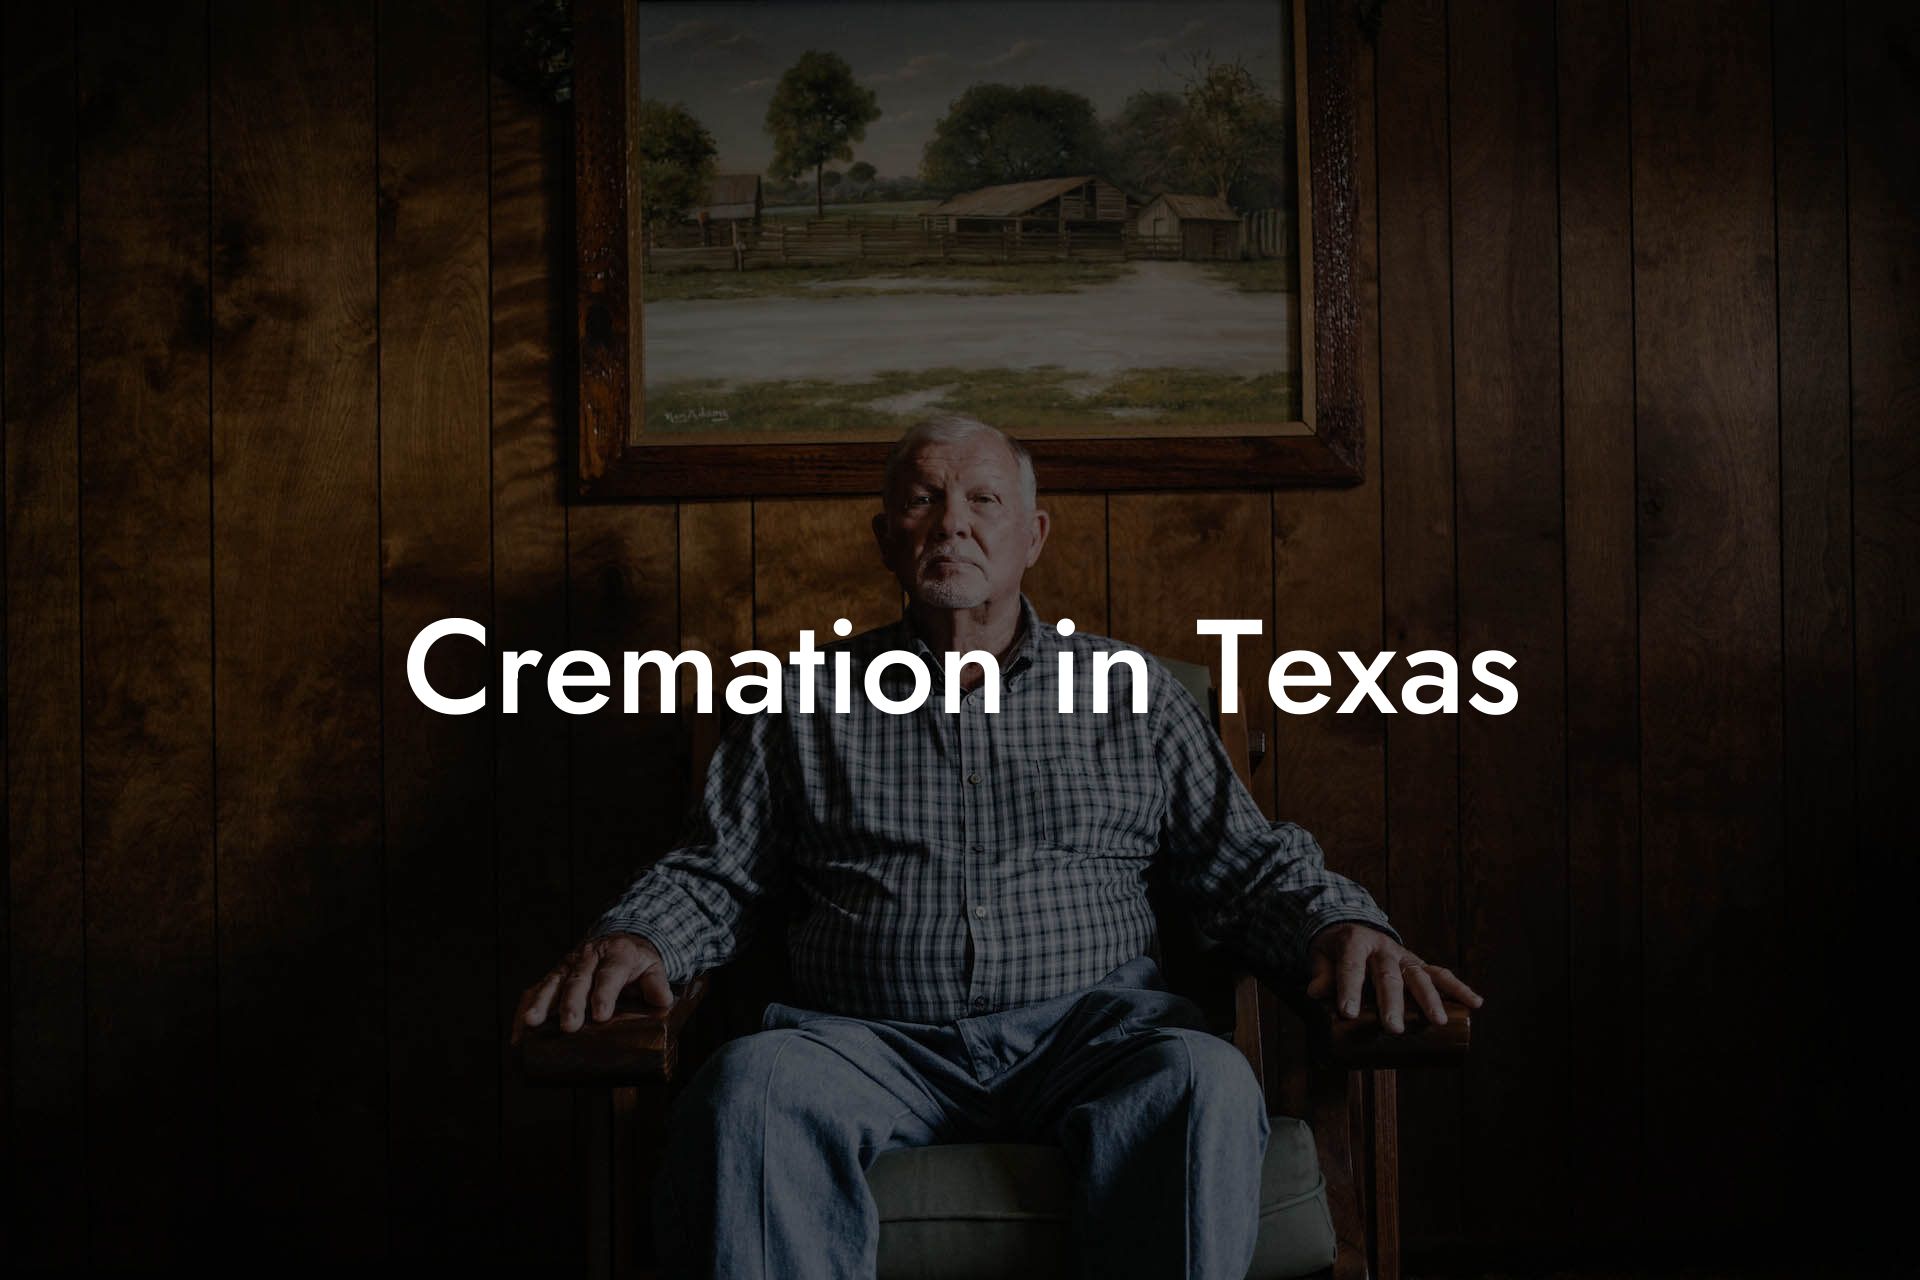 Cremation in Texas